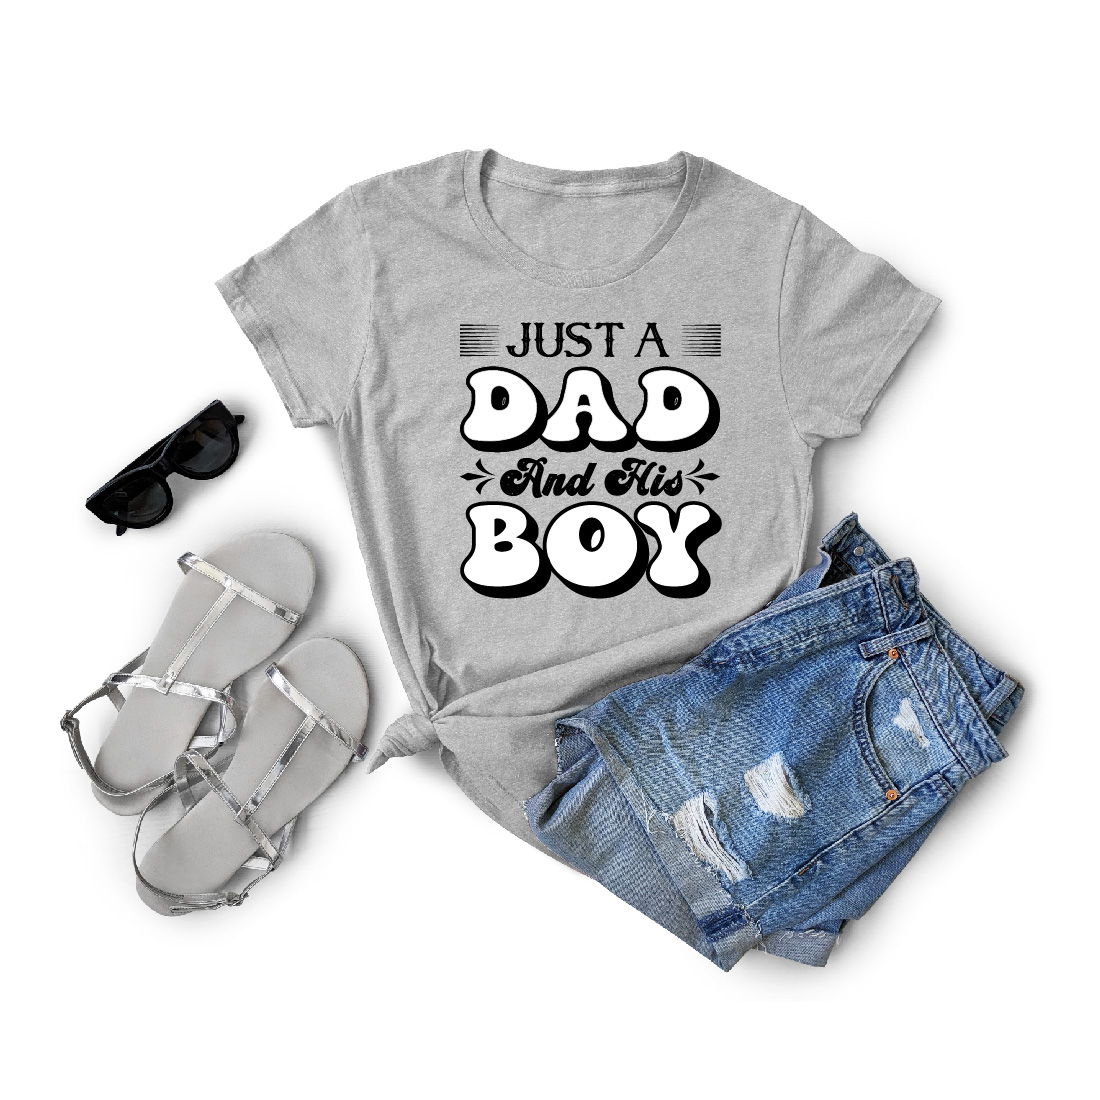 Just A Dad And His Boy T-Shirt Cricut File preview image.